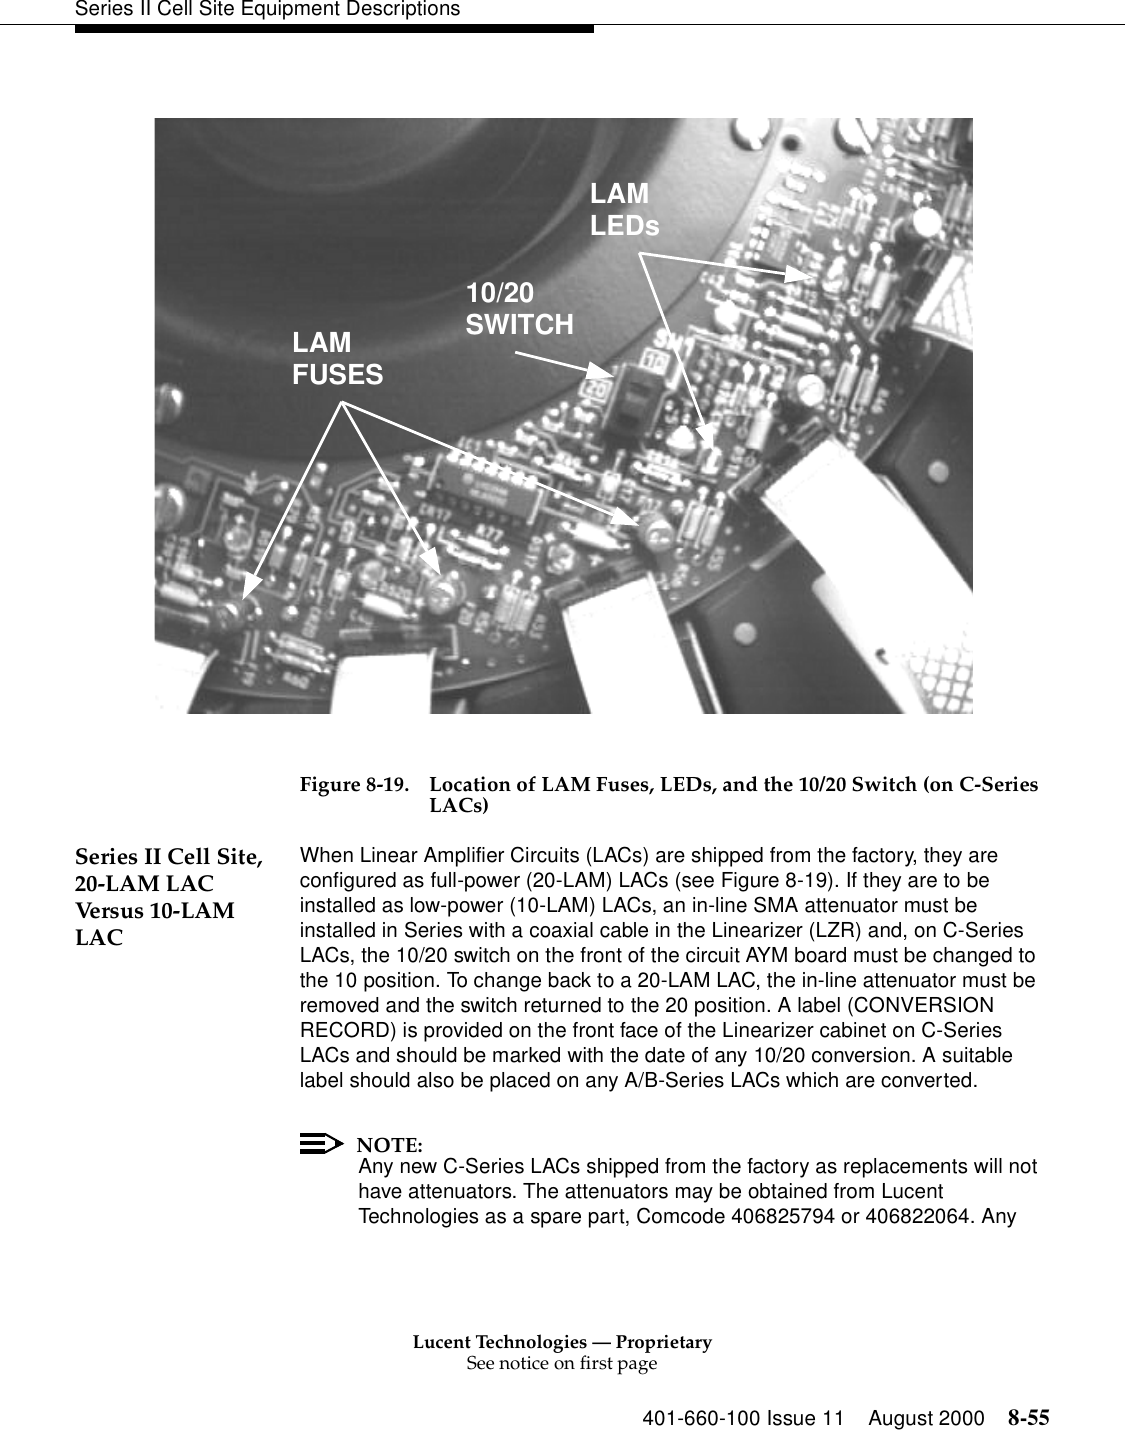 Lucent Technologies — ProprietarySee notice on first page401-660-100 Issue 11 August 2000 8-55Series II Cell Site Equipment DescriptionsFigure 8-19. Location of LAM Fuses, LEDs, and the 10/20 Switch (on C-Series LACs) Series II Cell Site, 20-LAM LAC Versus 10-LAM LACWhen Linear Amplifier Circuits (LACs) are shipped from the factory, they are configured as full-power (20-LAM) LACs (see Figure 8-19). If they are to be installed as low-power (10-LAM) LACs, an in-line SMA attenuator must be installed in Series with a coaxial cable in the Linearizer (LZR) and, on C-Series LACs, the 10/20 switch on the front of the circuit AYM board must be changed to the 10 position. To change back to a 20-LAM LAC, the in-line attenuator must be removed and the switch returned to the 20 position. A label (CONVERSION RECORD) is provided on the front face of the Linearizer cabinet on C-Series LACs and should be marked with the date of any 10/20 conversion. A suitable label should also be placed on any A/B-Series LACs which are converted. NOTE:Any new C-Series LACs shipped from the factory as replacements will not have attenuators. The attenuators may be obtained from Lucent Technologies as a spare part, Comcode 406825794 or 406822064. Any LAMLEDs10/20SWITCHLAMFUSES